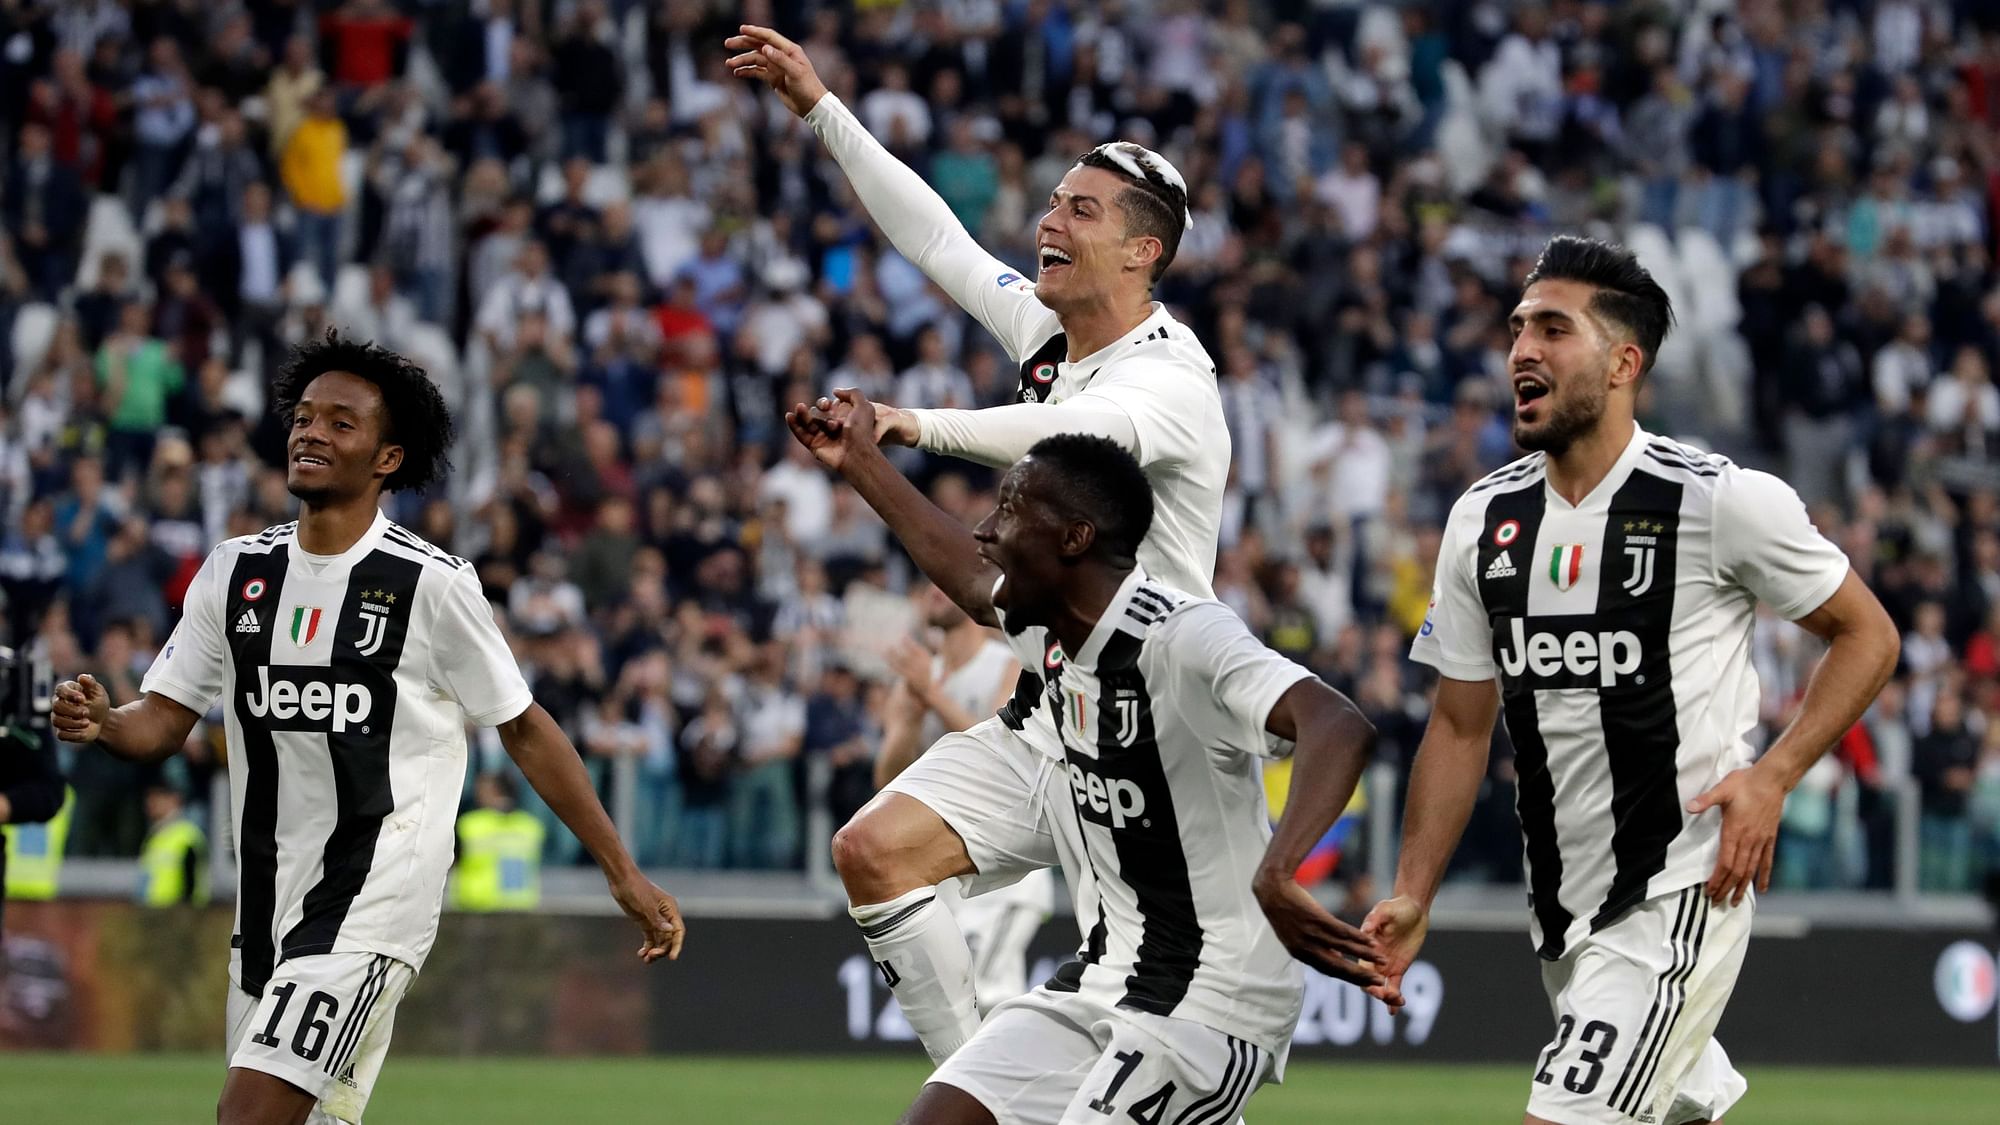 Cristiano Ronaldo played a key role in the winning goal and Juventus beat Fiorentina 2-1 to clinch a record-extending eighth straight Serie A title.